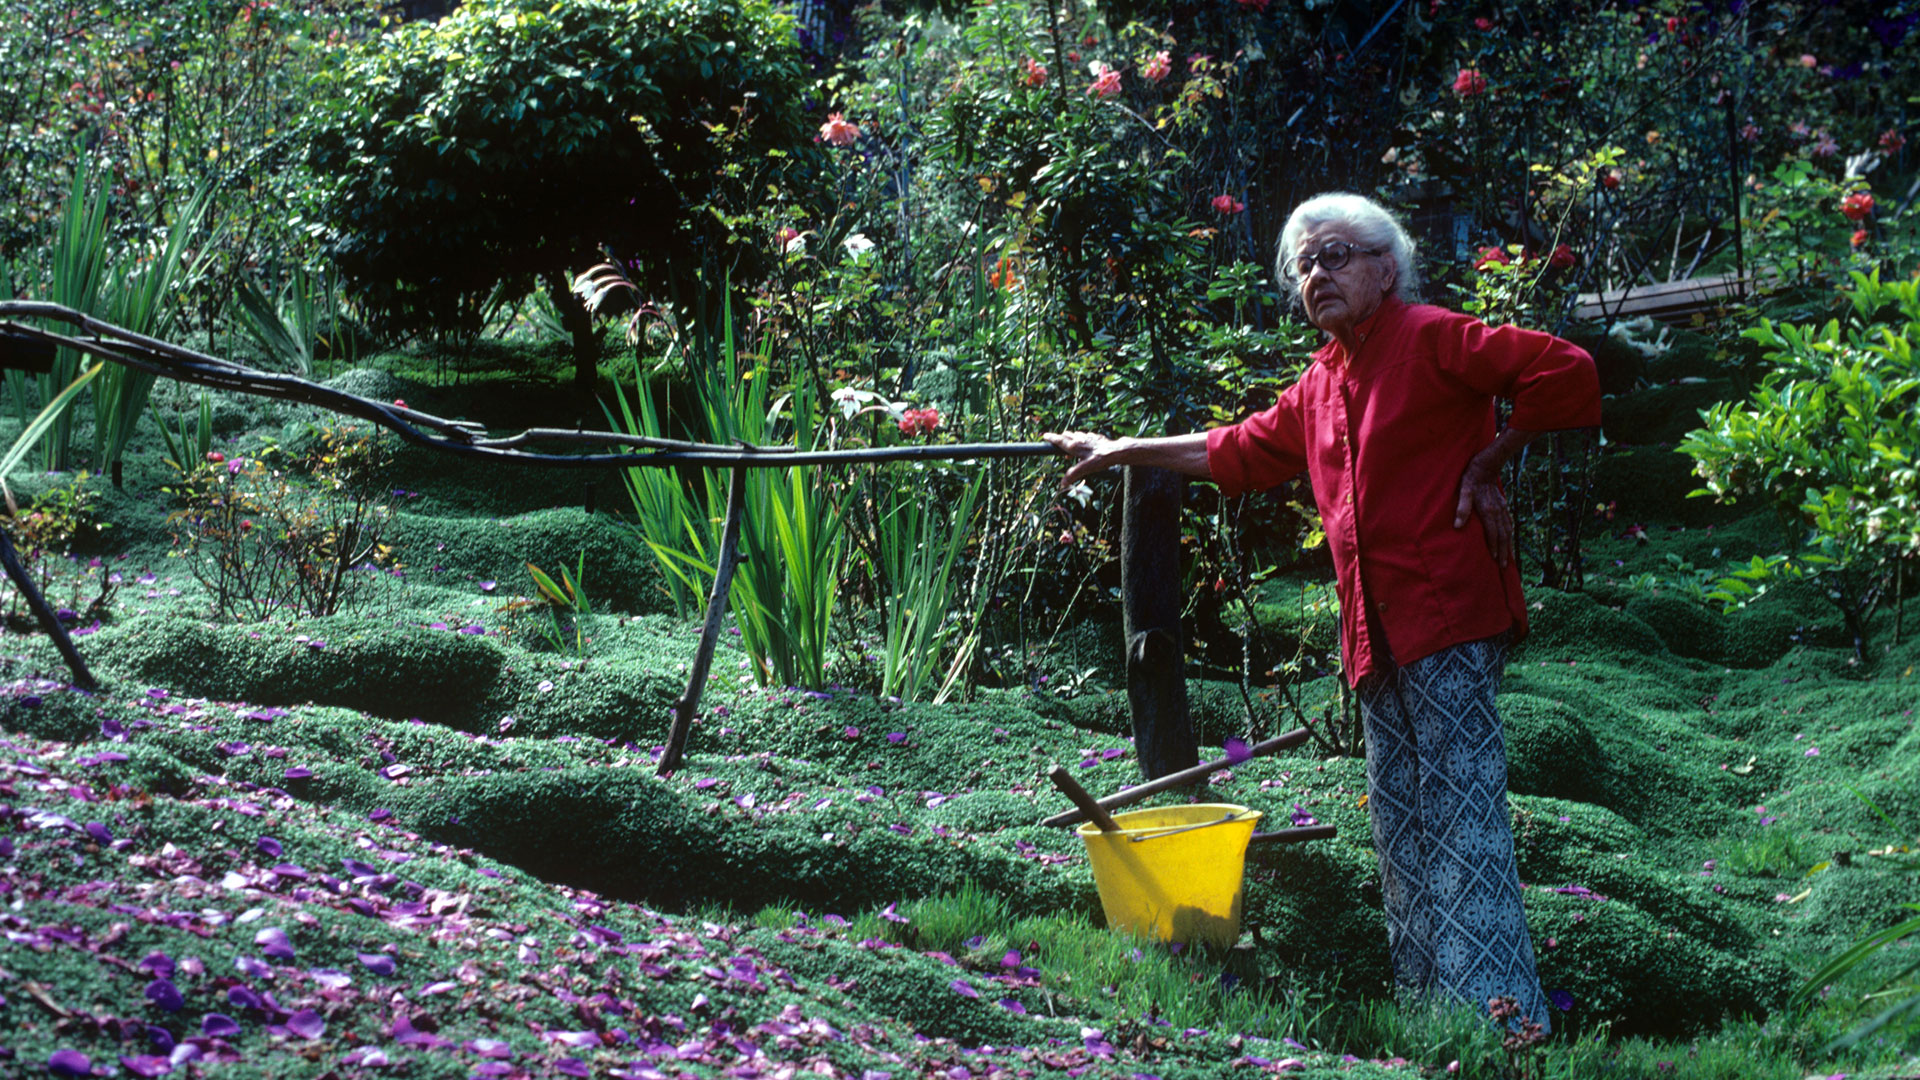 An older woman in loose fitting pants and a red blouse stands with her hand resting on a fence that surrounds a lush green garden stretching out behind her.